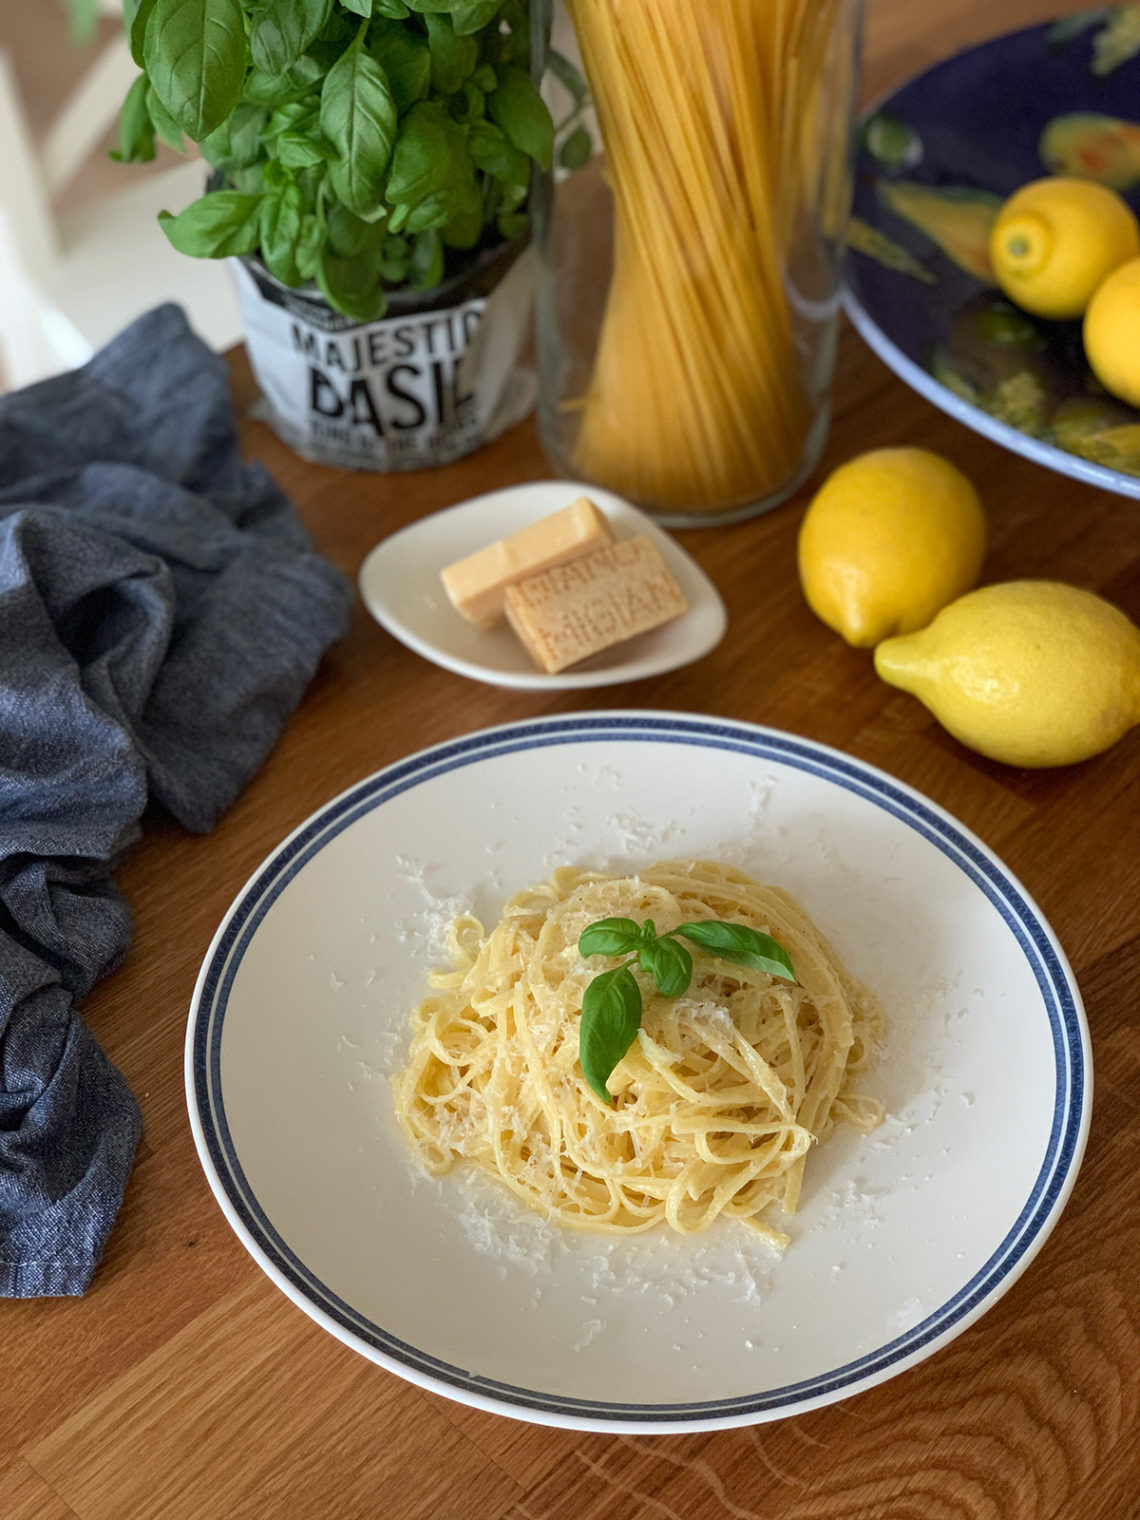 Lemon spaghetti. Delicious recipes from famous chefs.